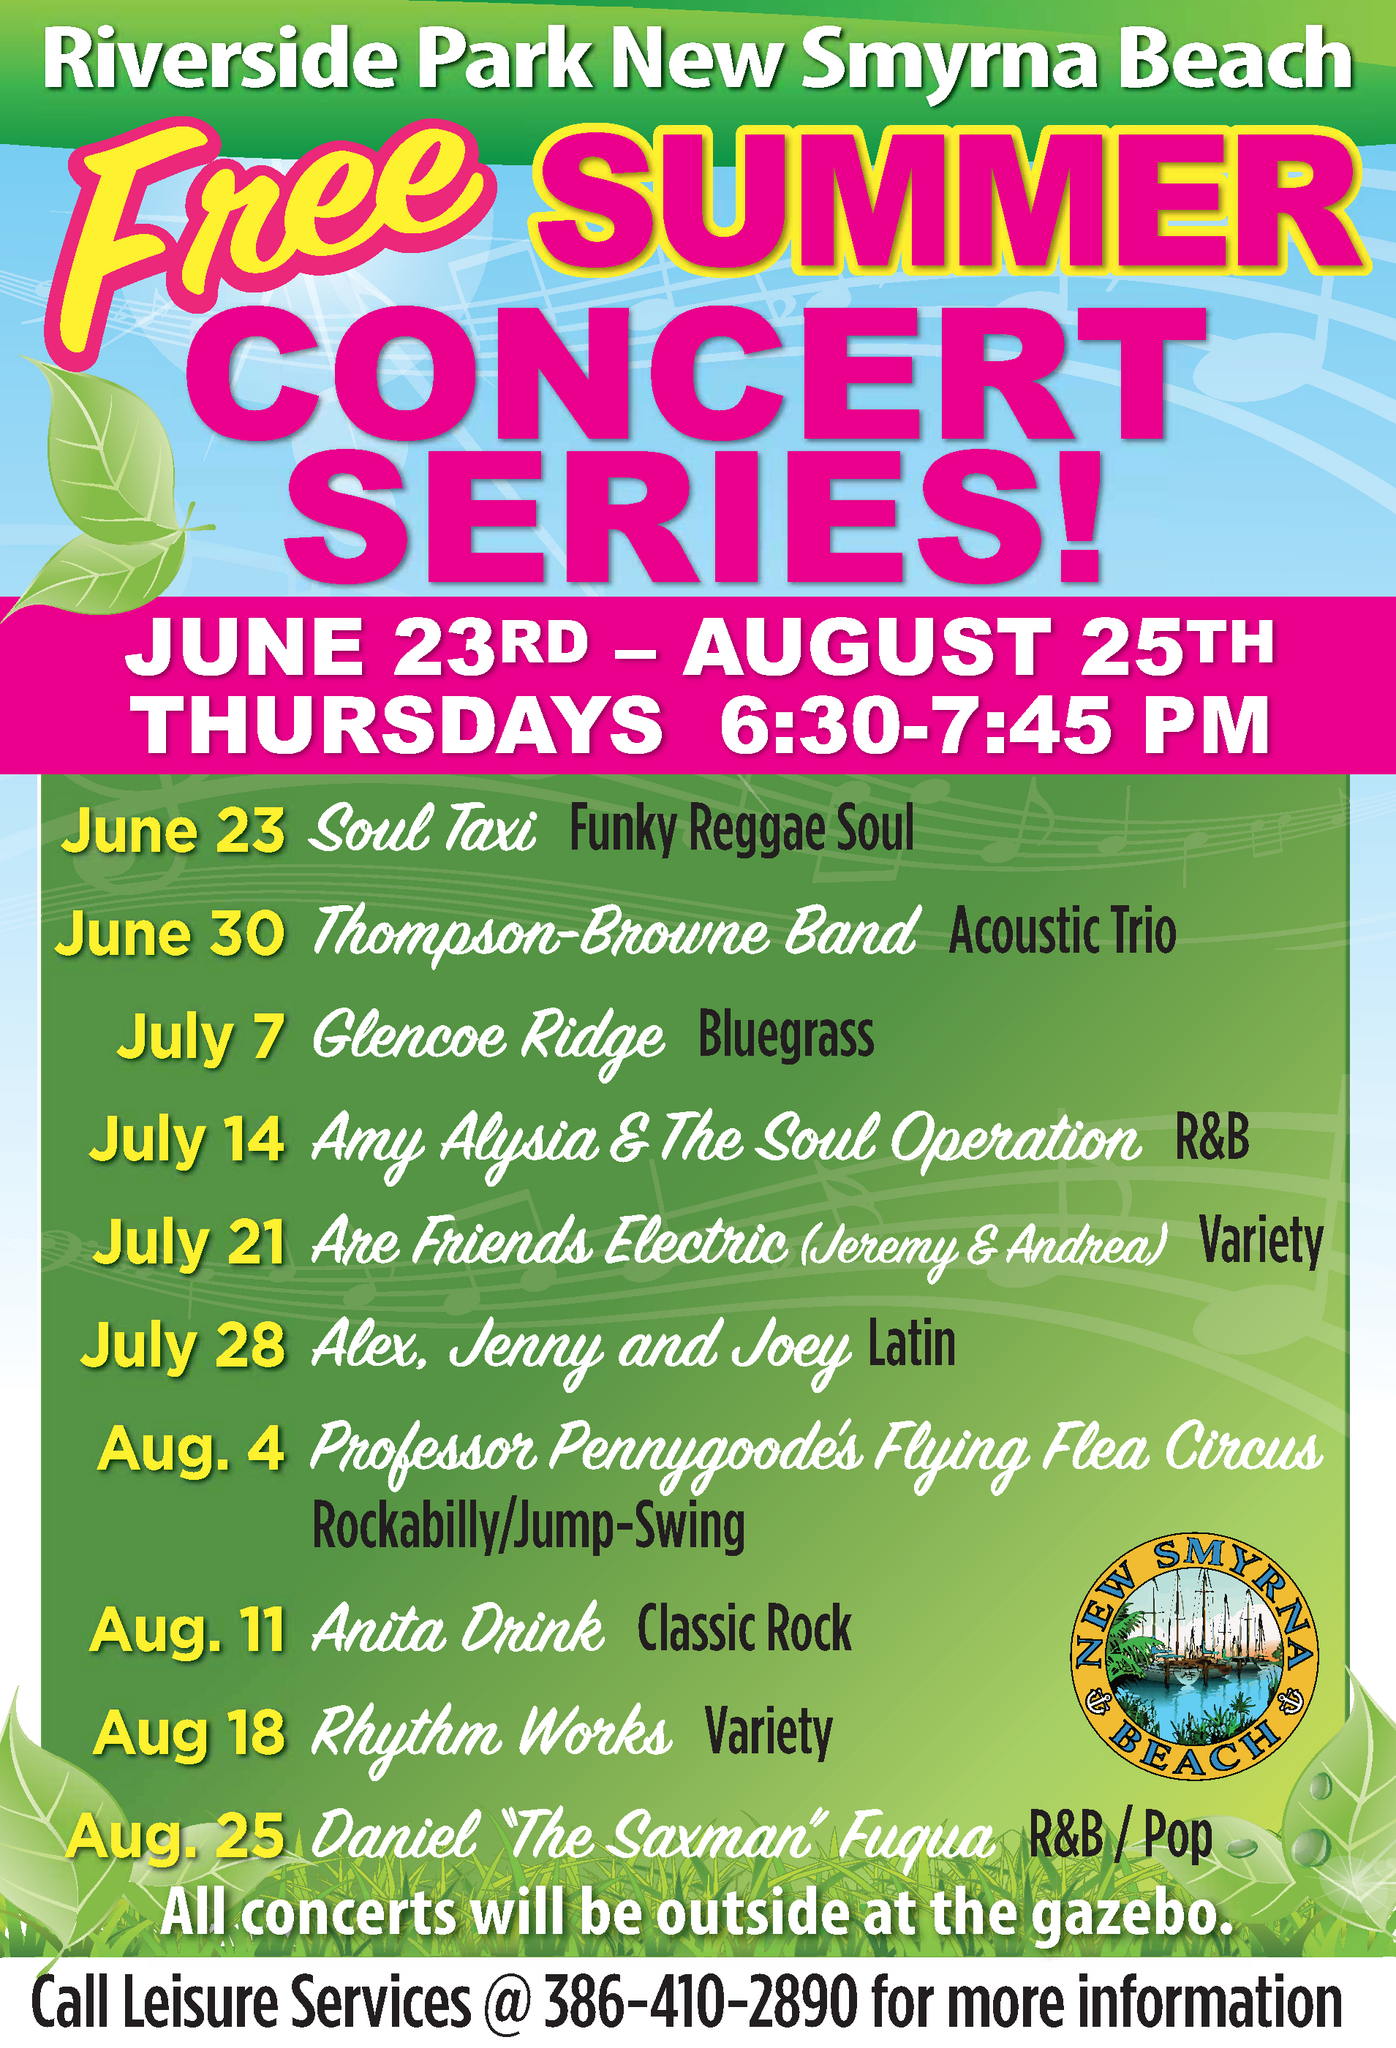 Here's the lineup for our 2022 Free Summer Concert Series (City of New